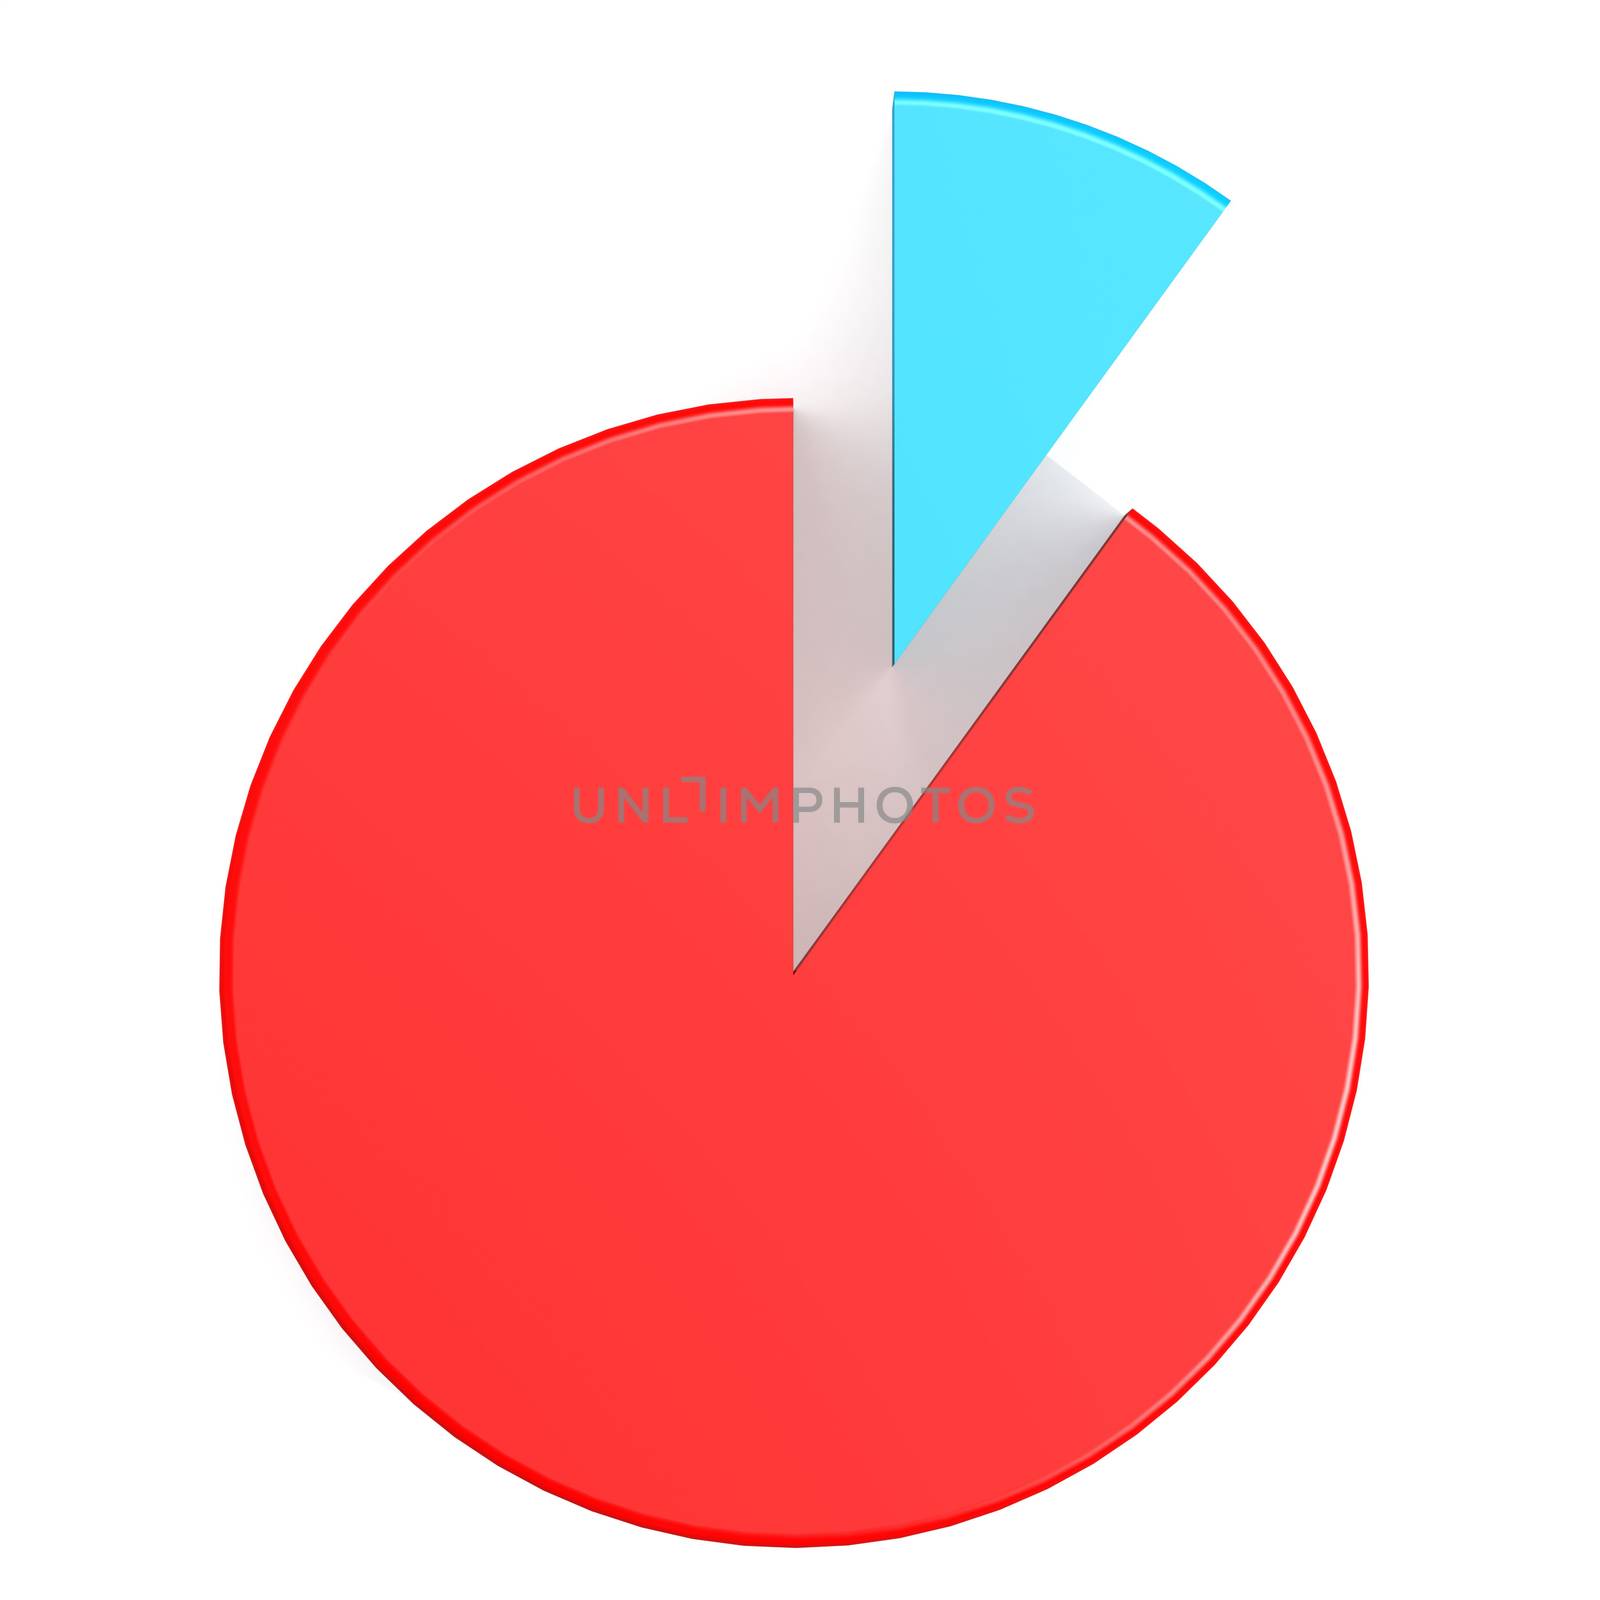 Blue and red pie chart with ten and ninety percent